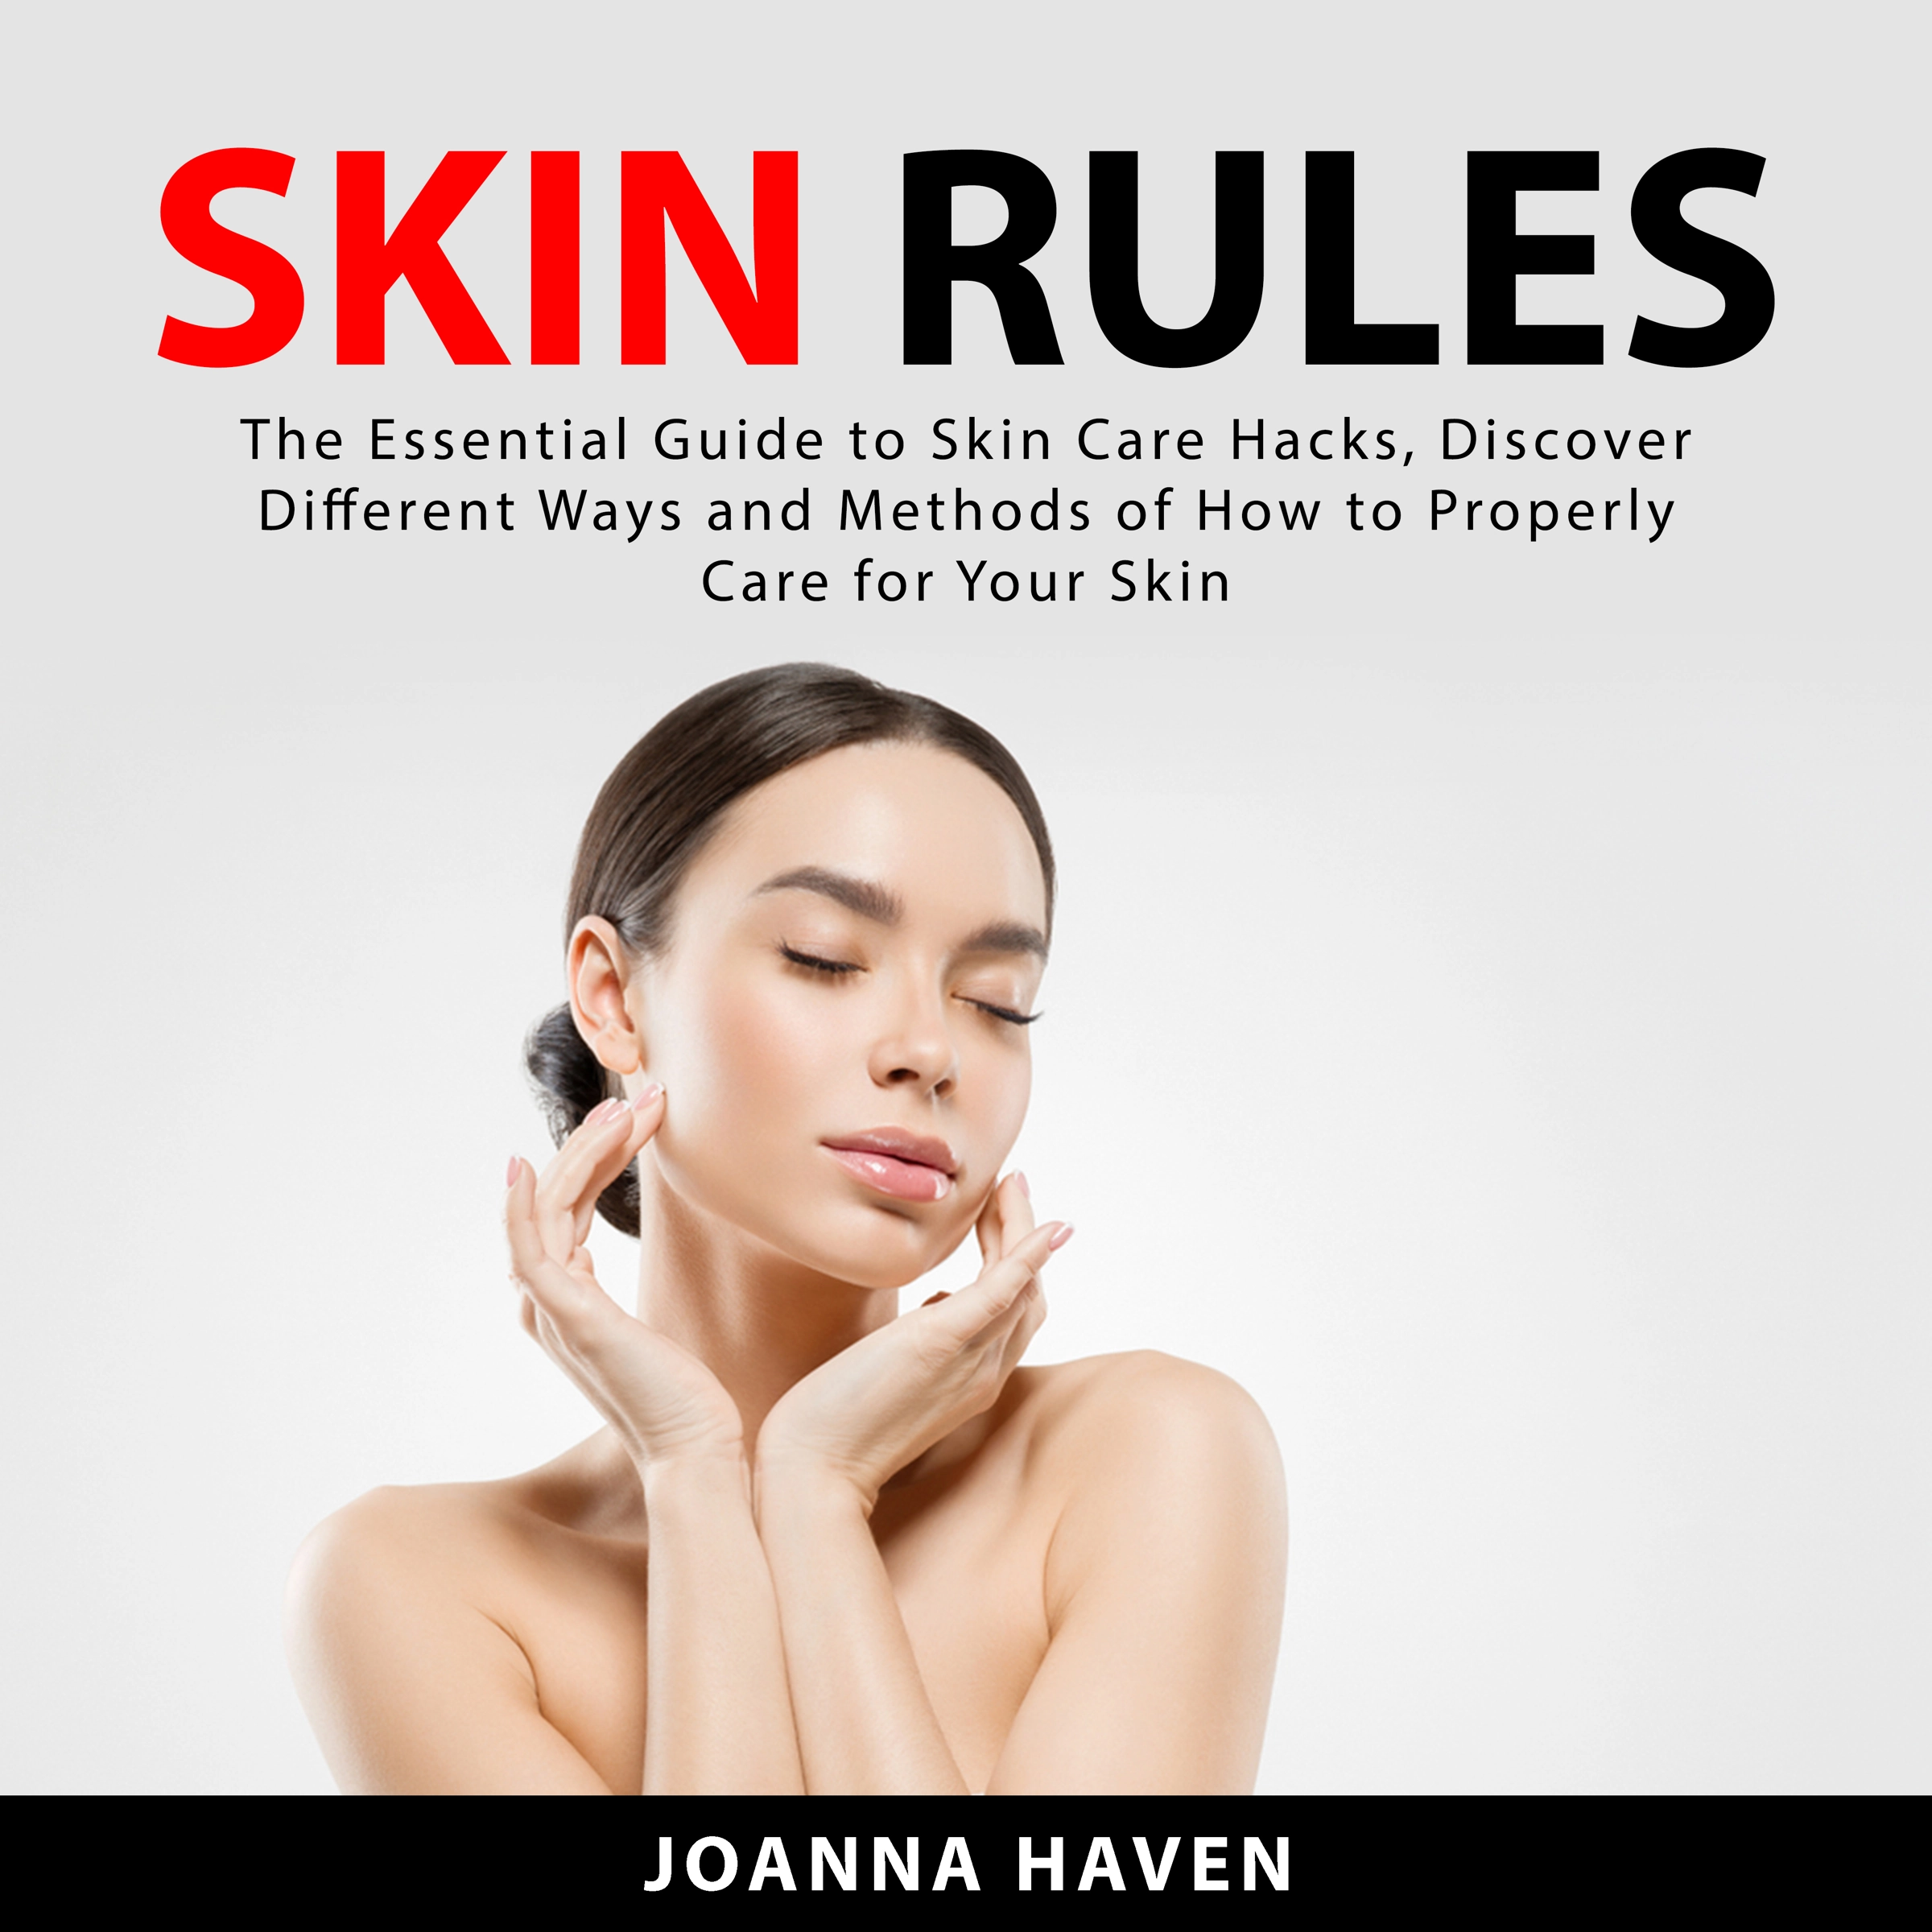 Skin Rules Audiobook by Joanna Haven